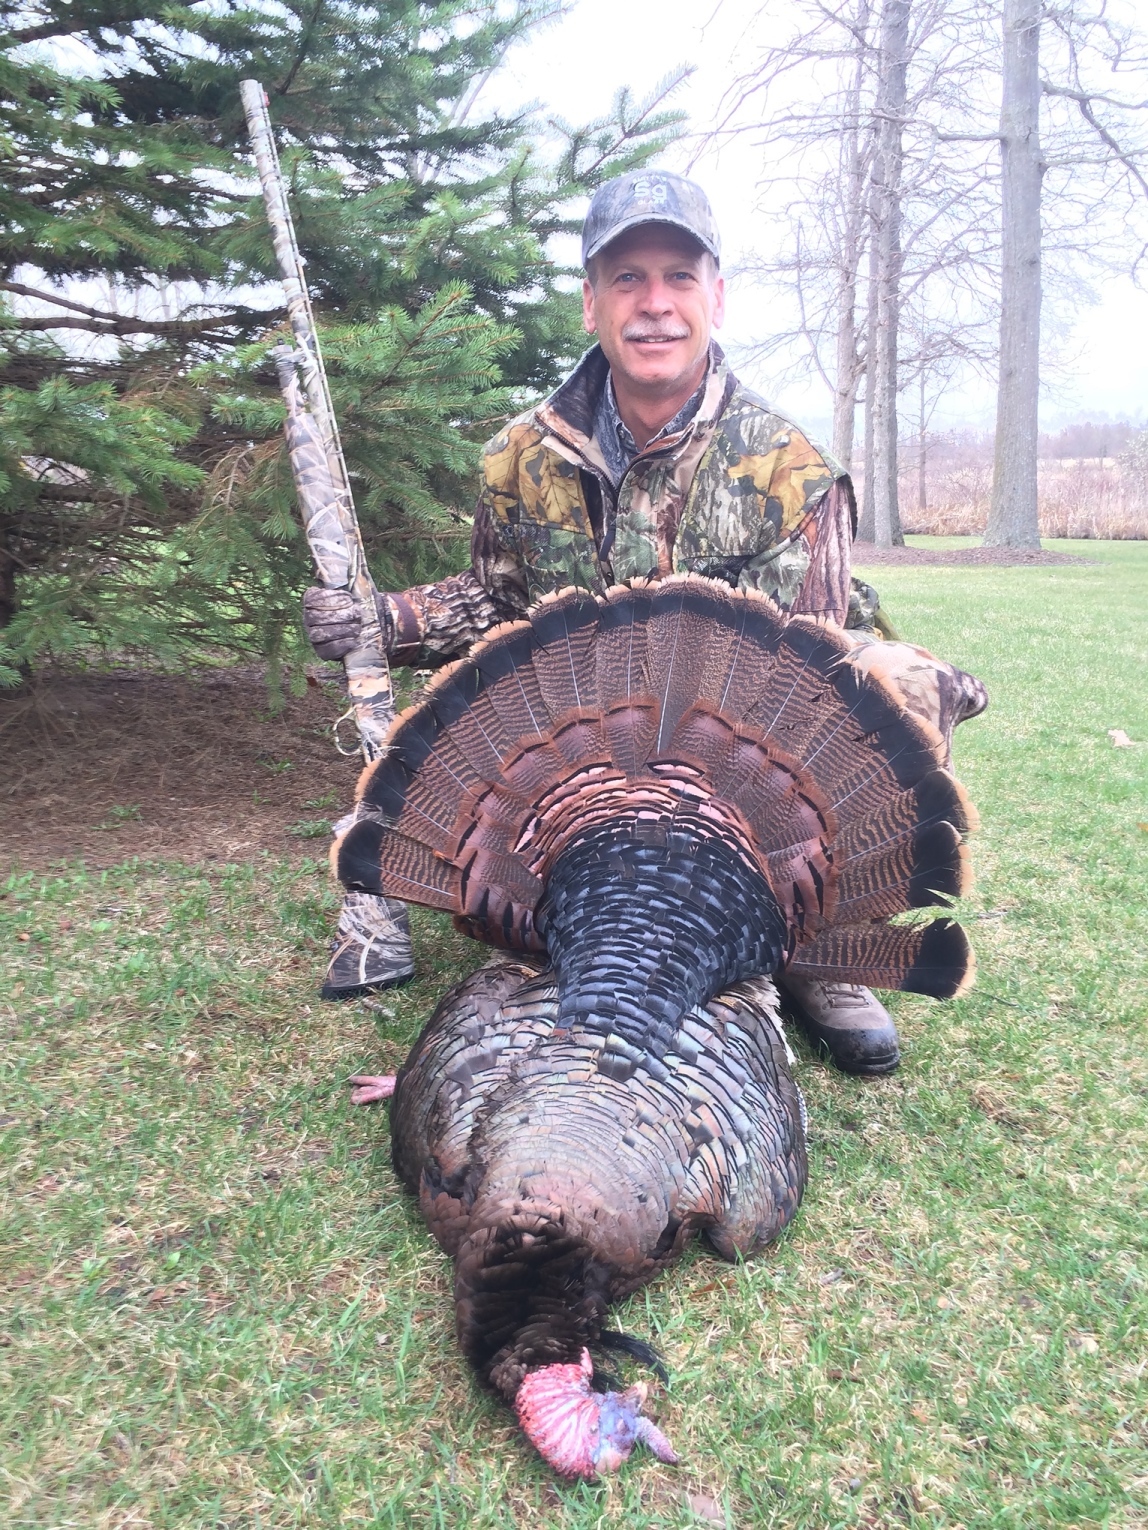 Bruce Shaneour of Osseo shown with the prize he bagged on his 2014 Pure Michigan spring turkey hunt.